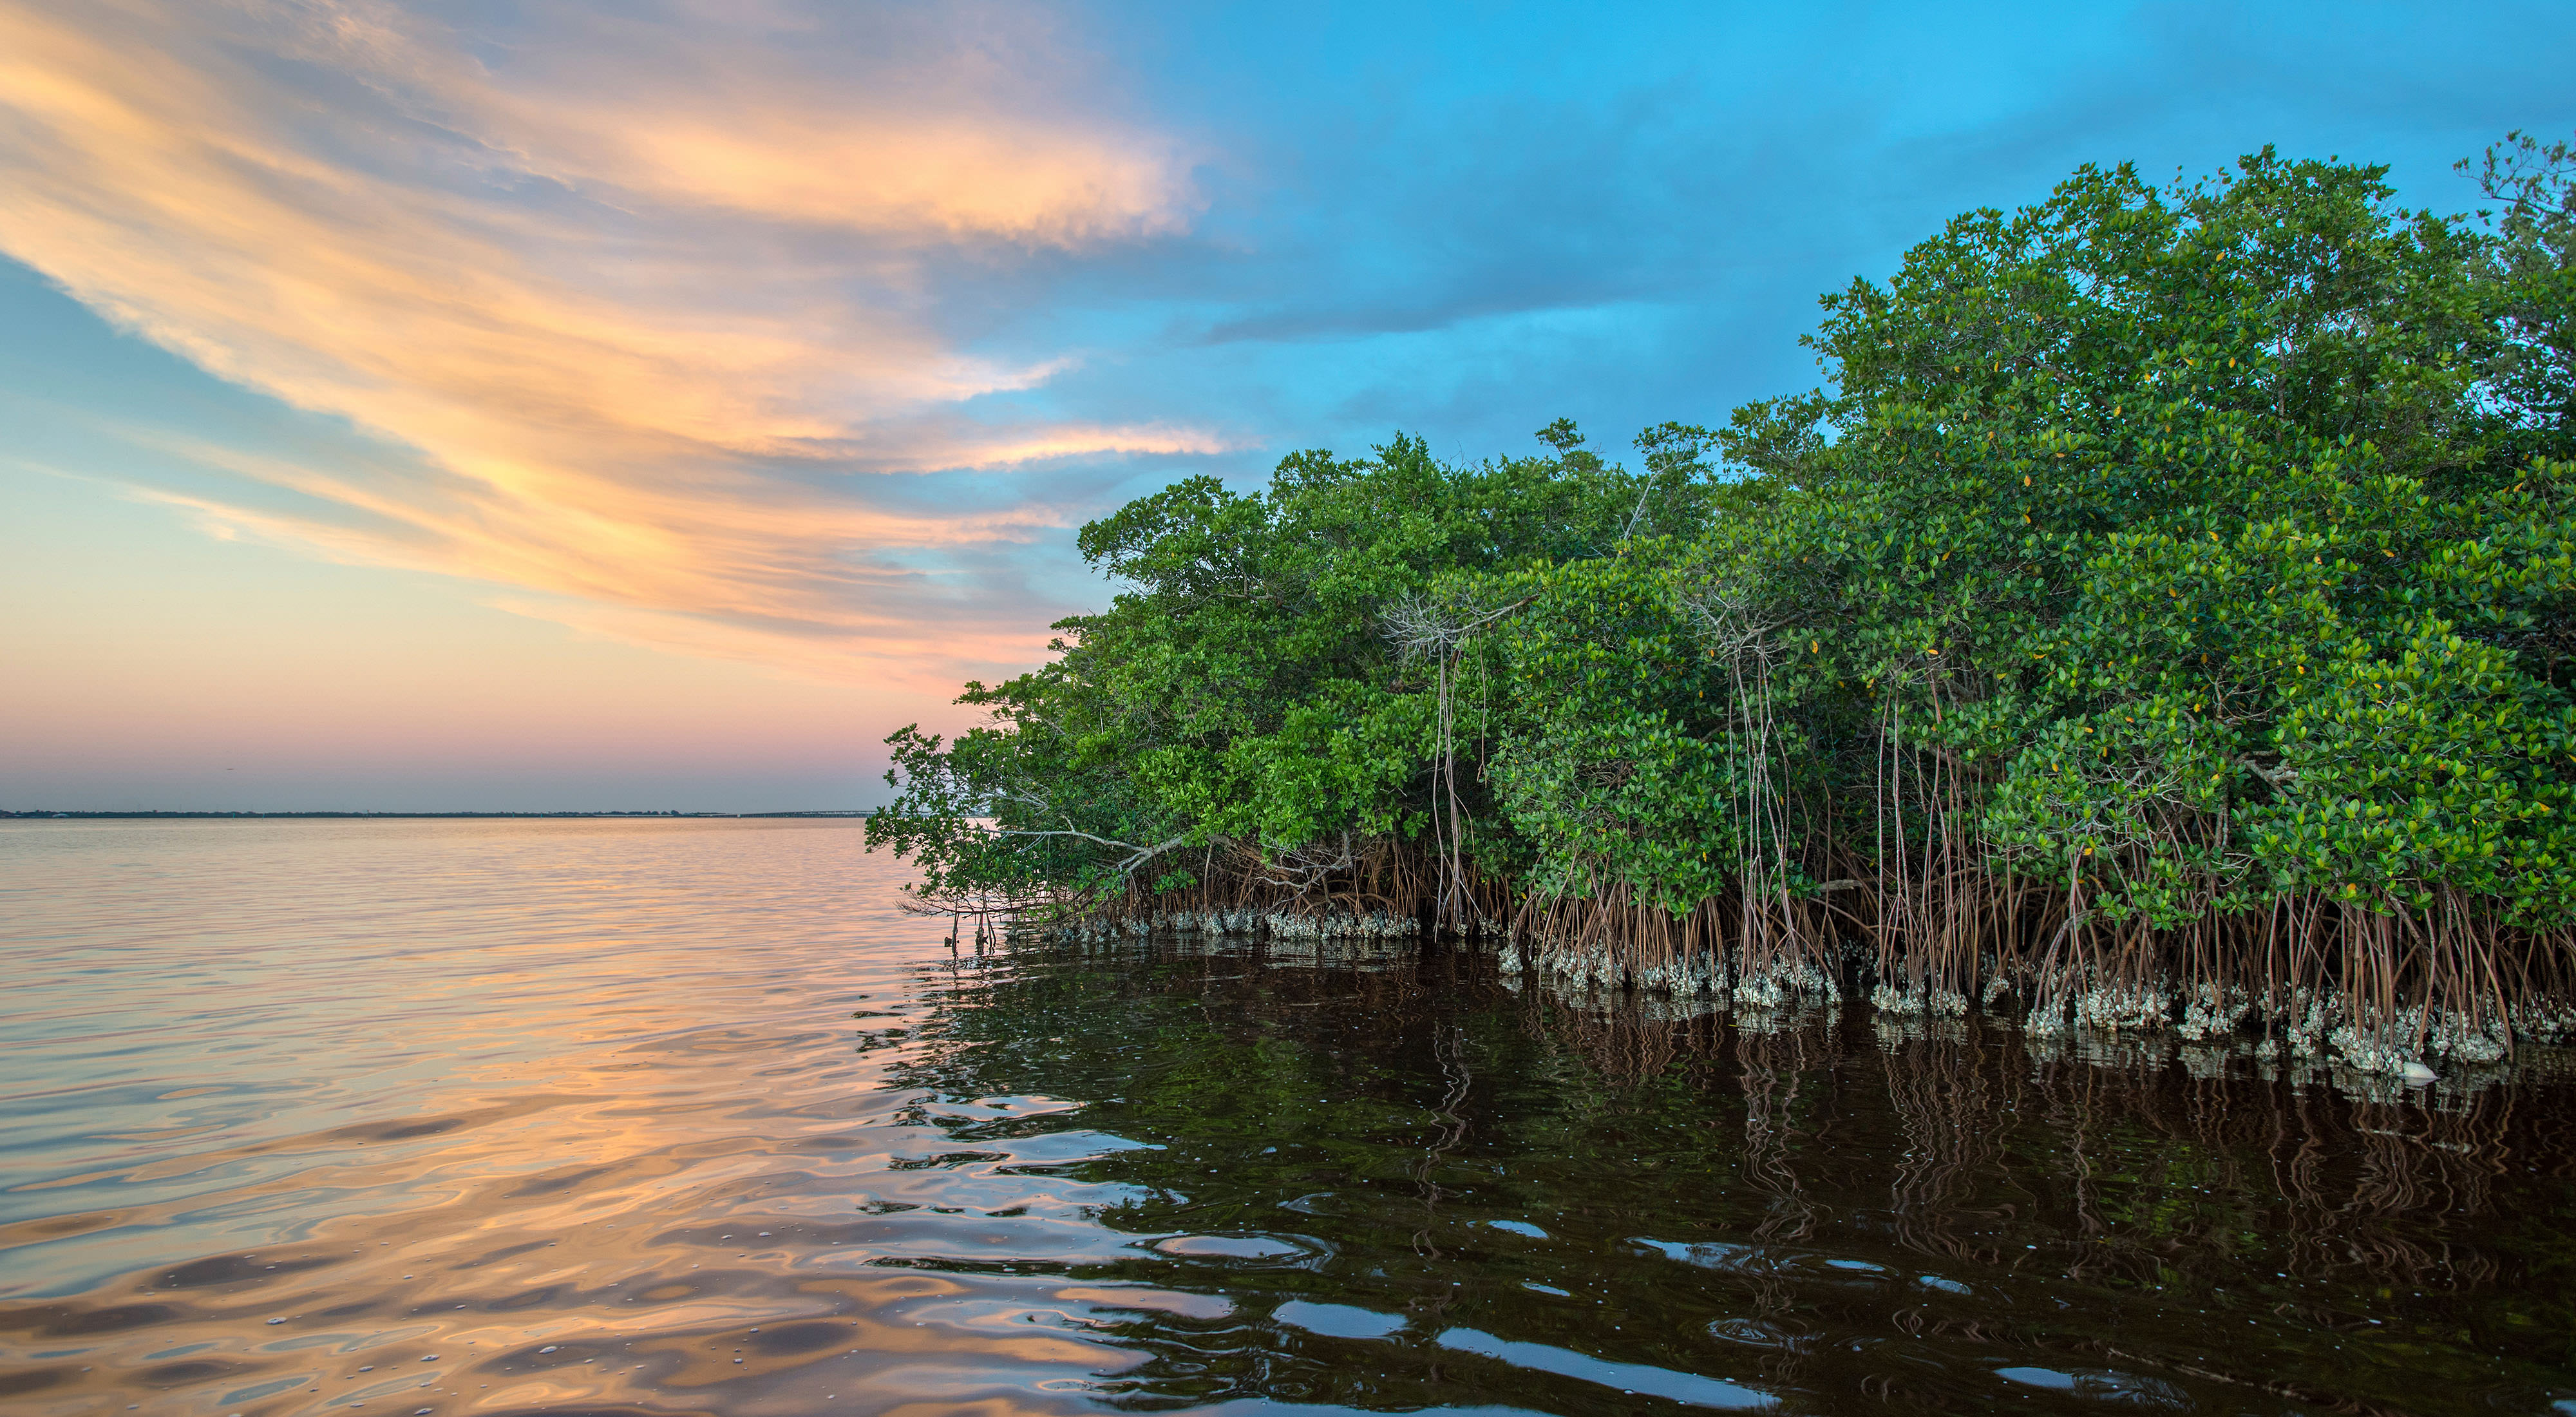 Coastal mangrove forests serve as a breeding gound for sea life and a natural barrier against storms and sea level rise erosion. © Ralph Pace